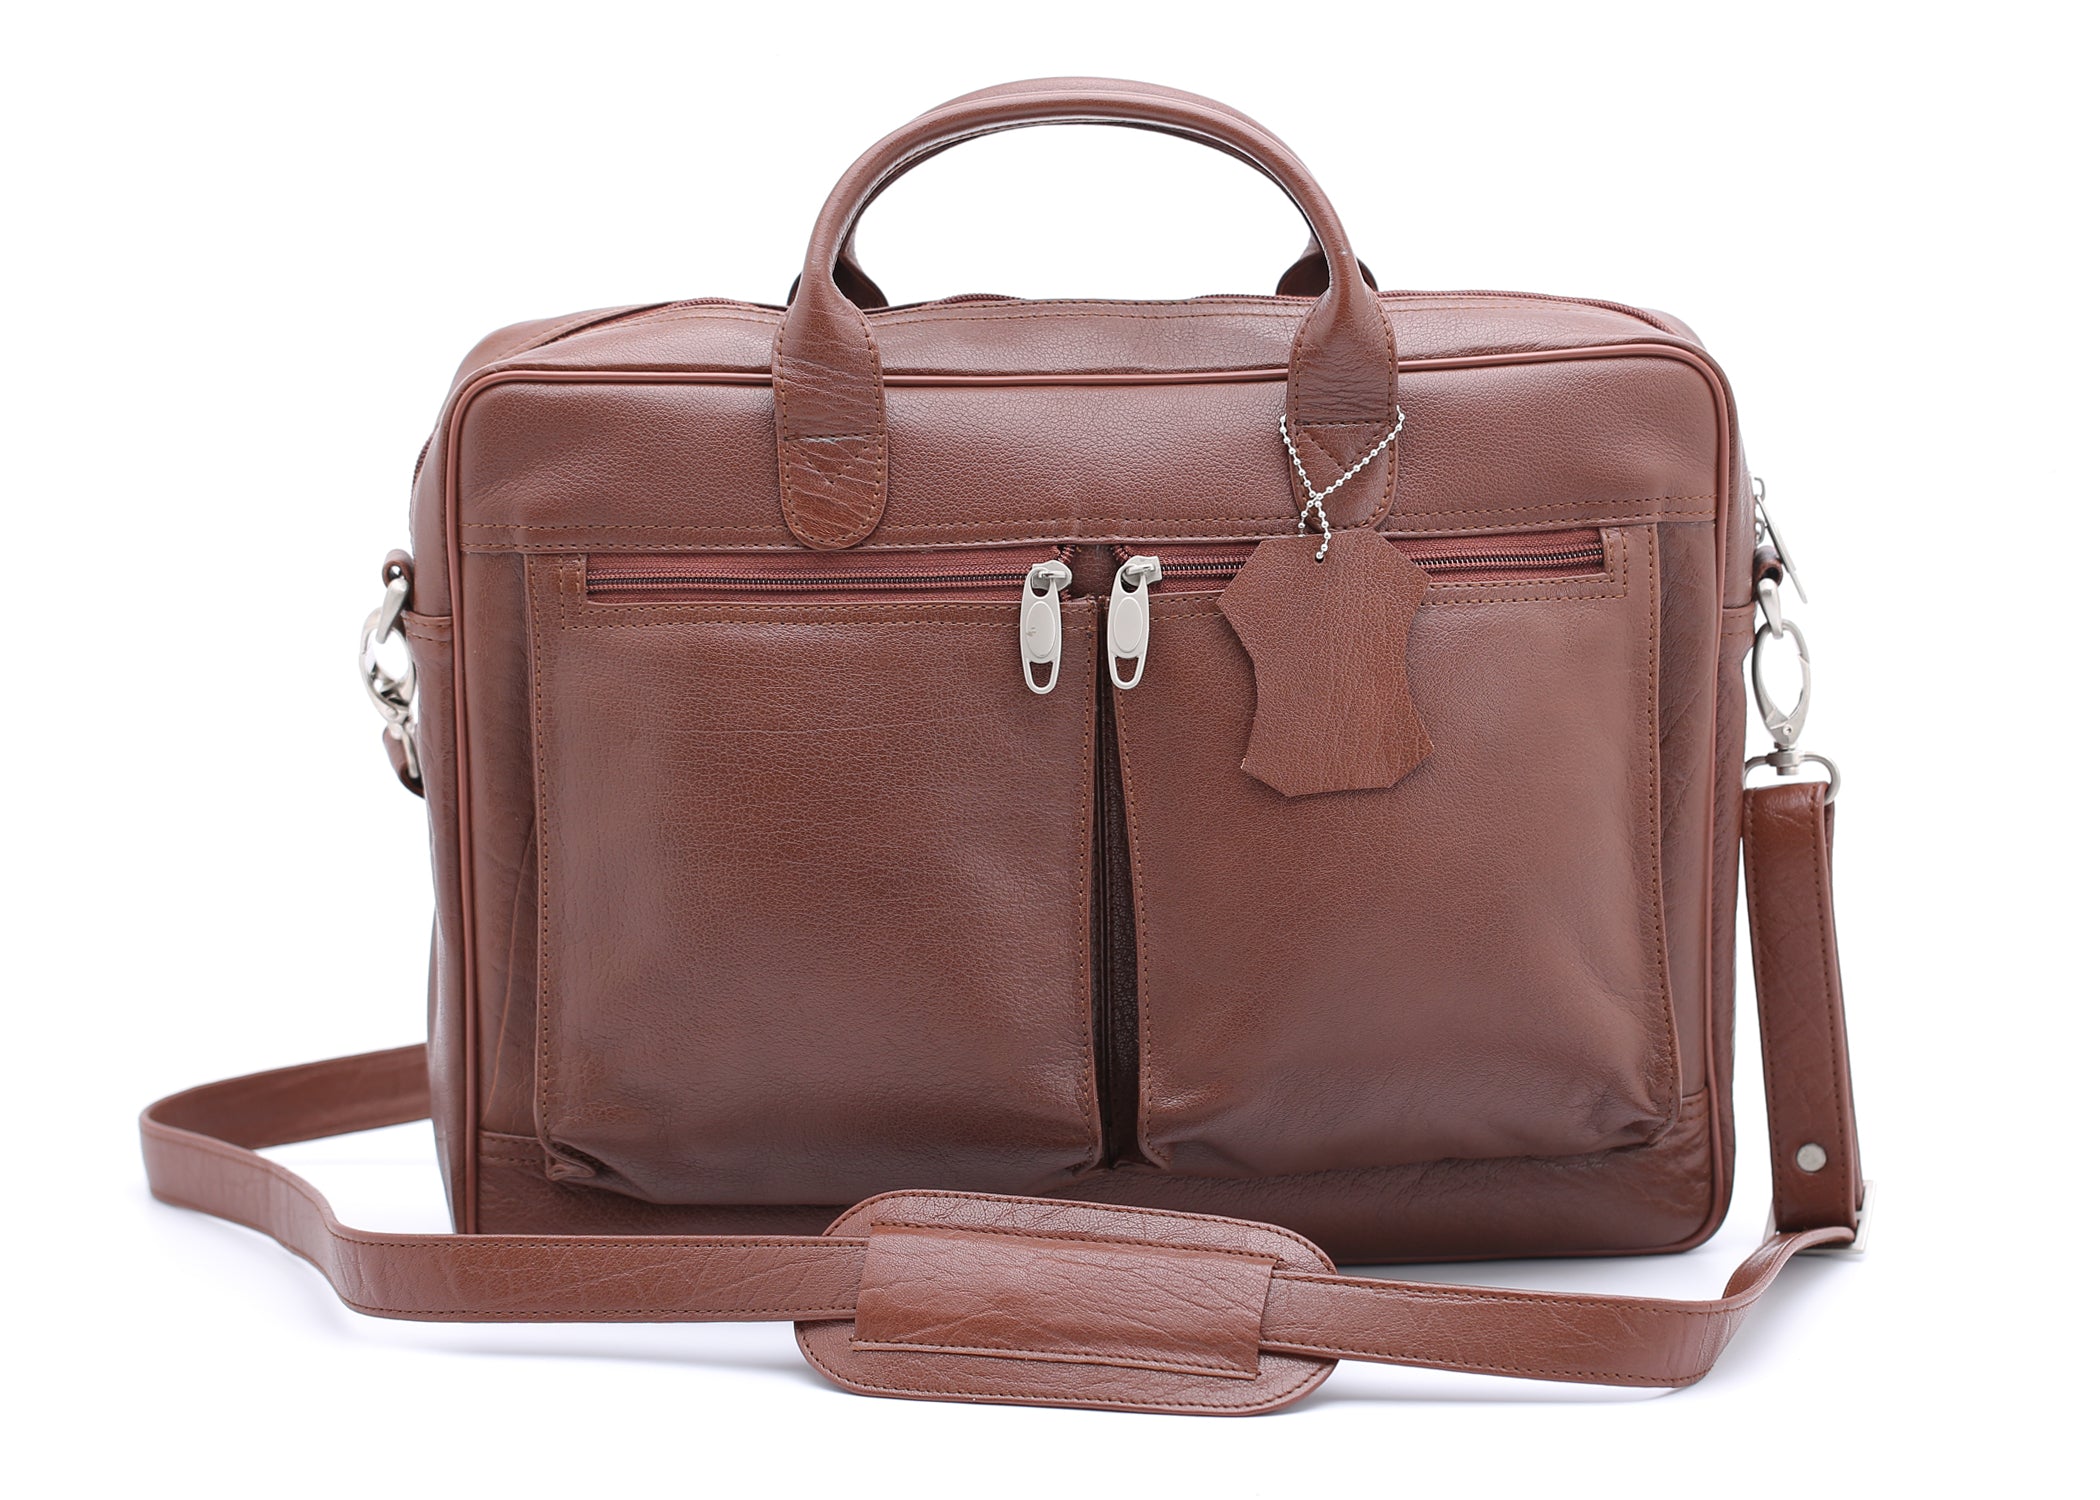 The Ultimate Leather Breifcase Bag-Tan